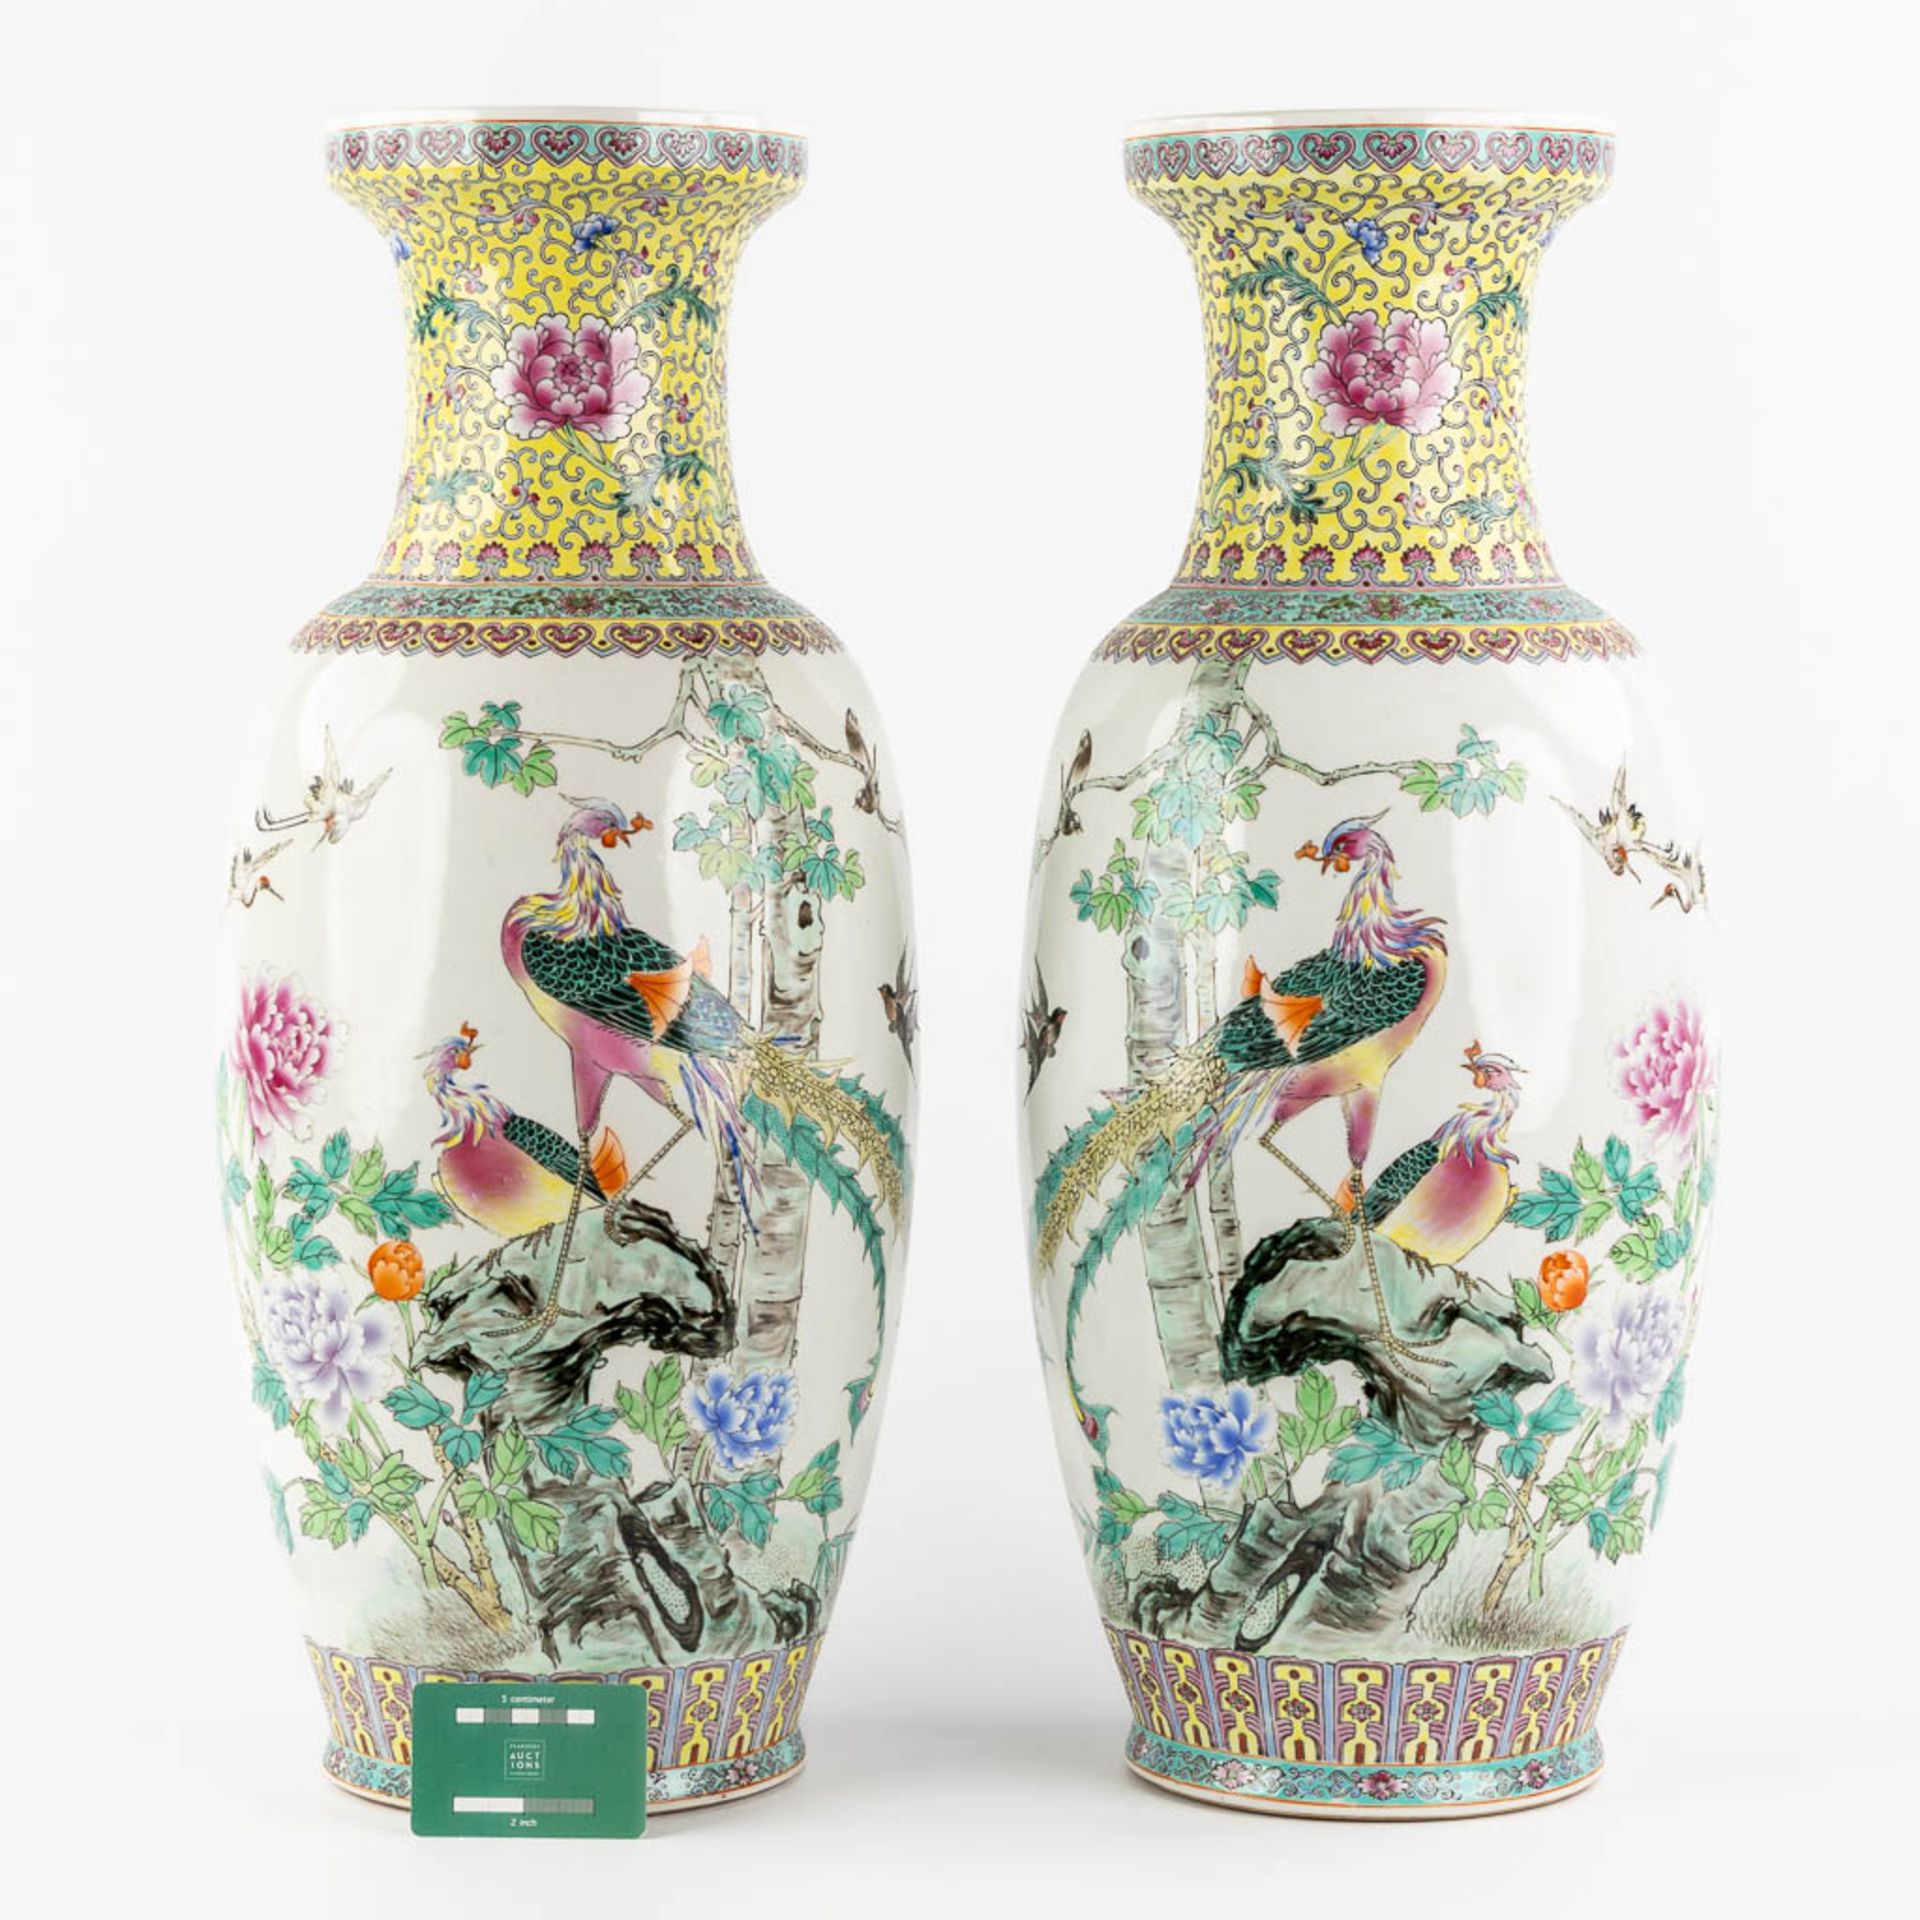 A decorative pair of Chinese vases with a Phoenix decor, 20th C. (H:62 x D:26 cm) - Image 2 of 16